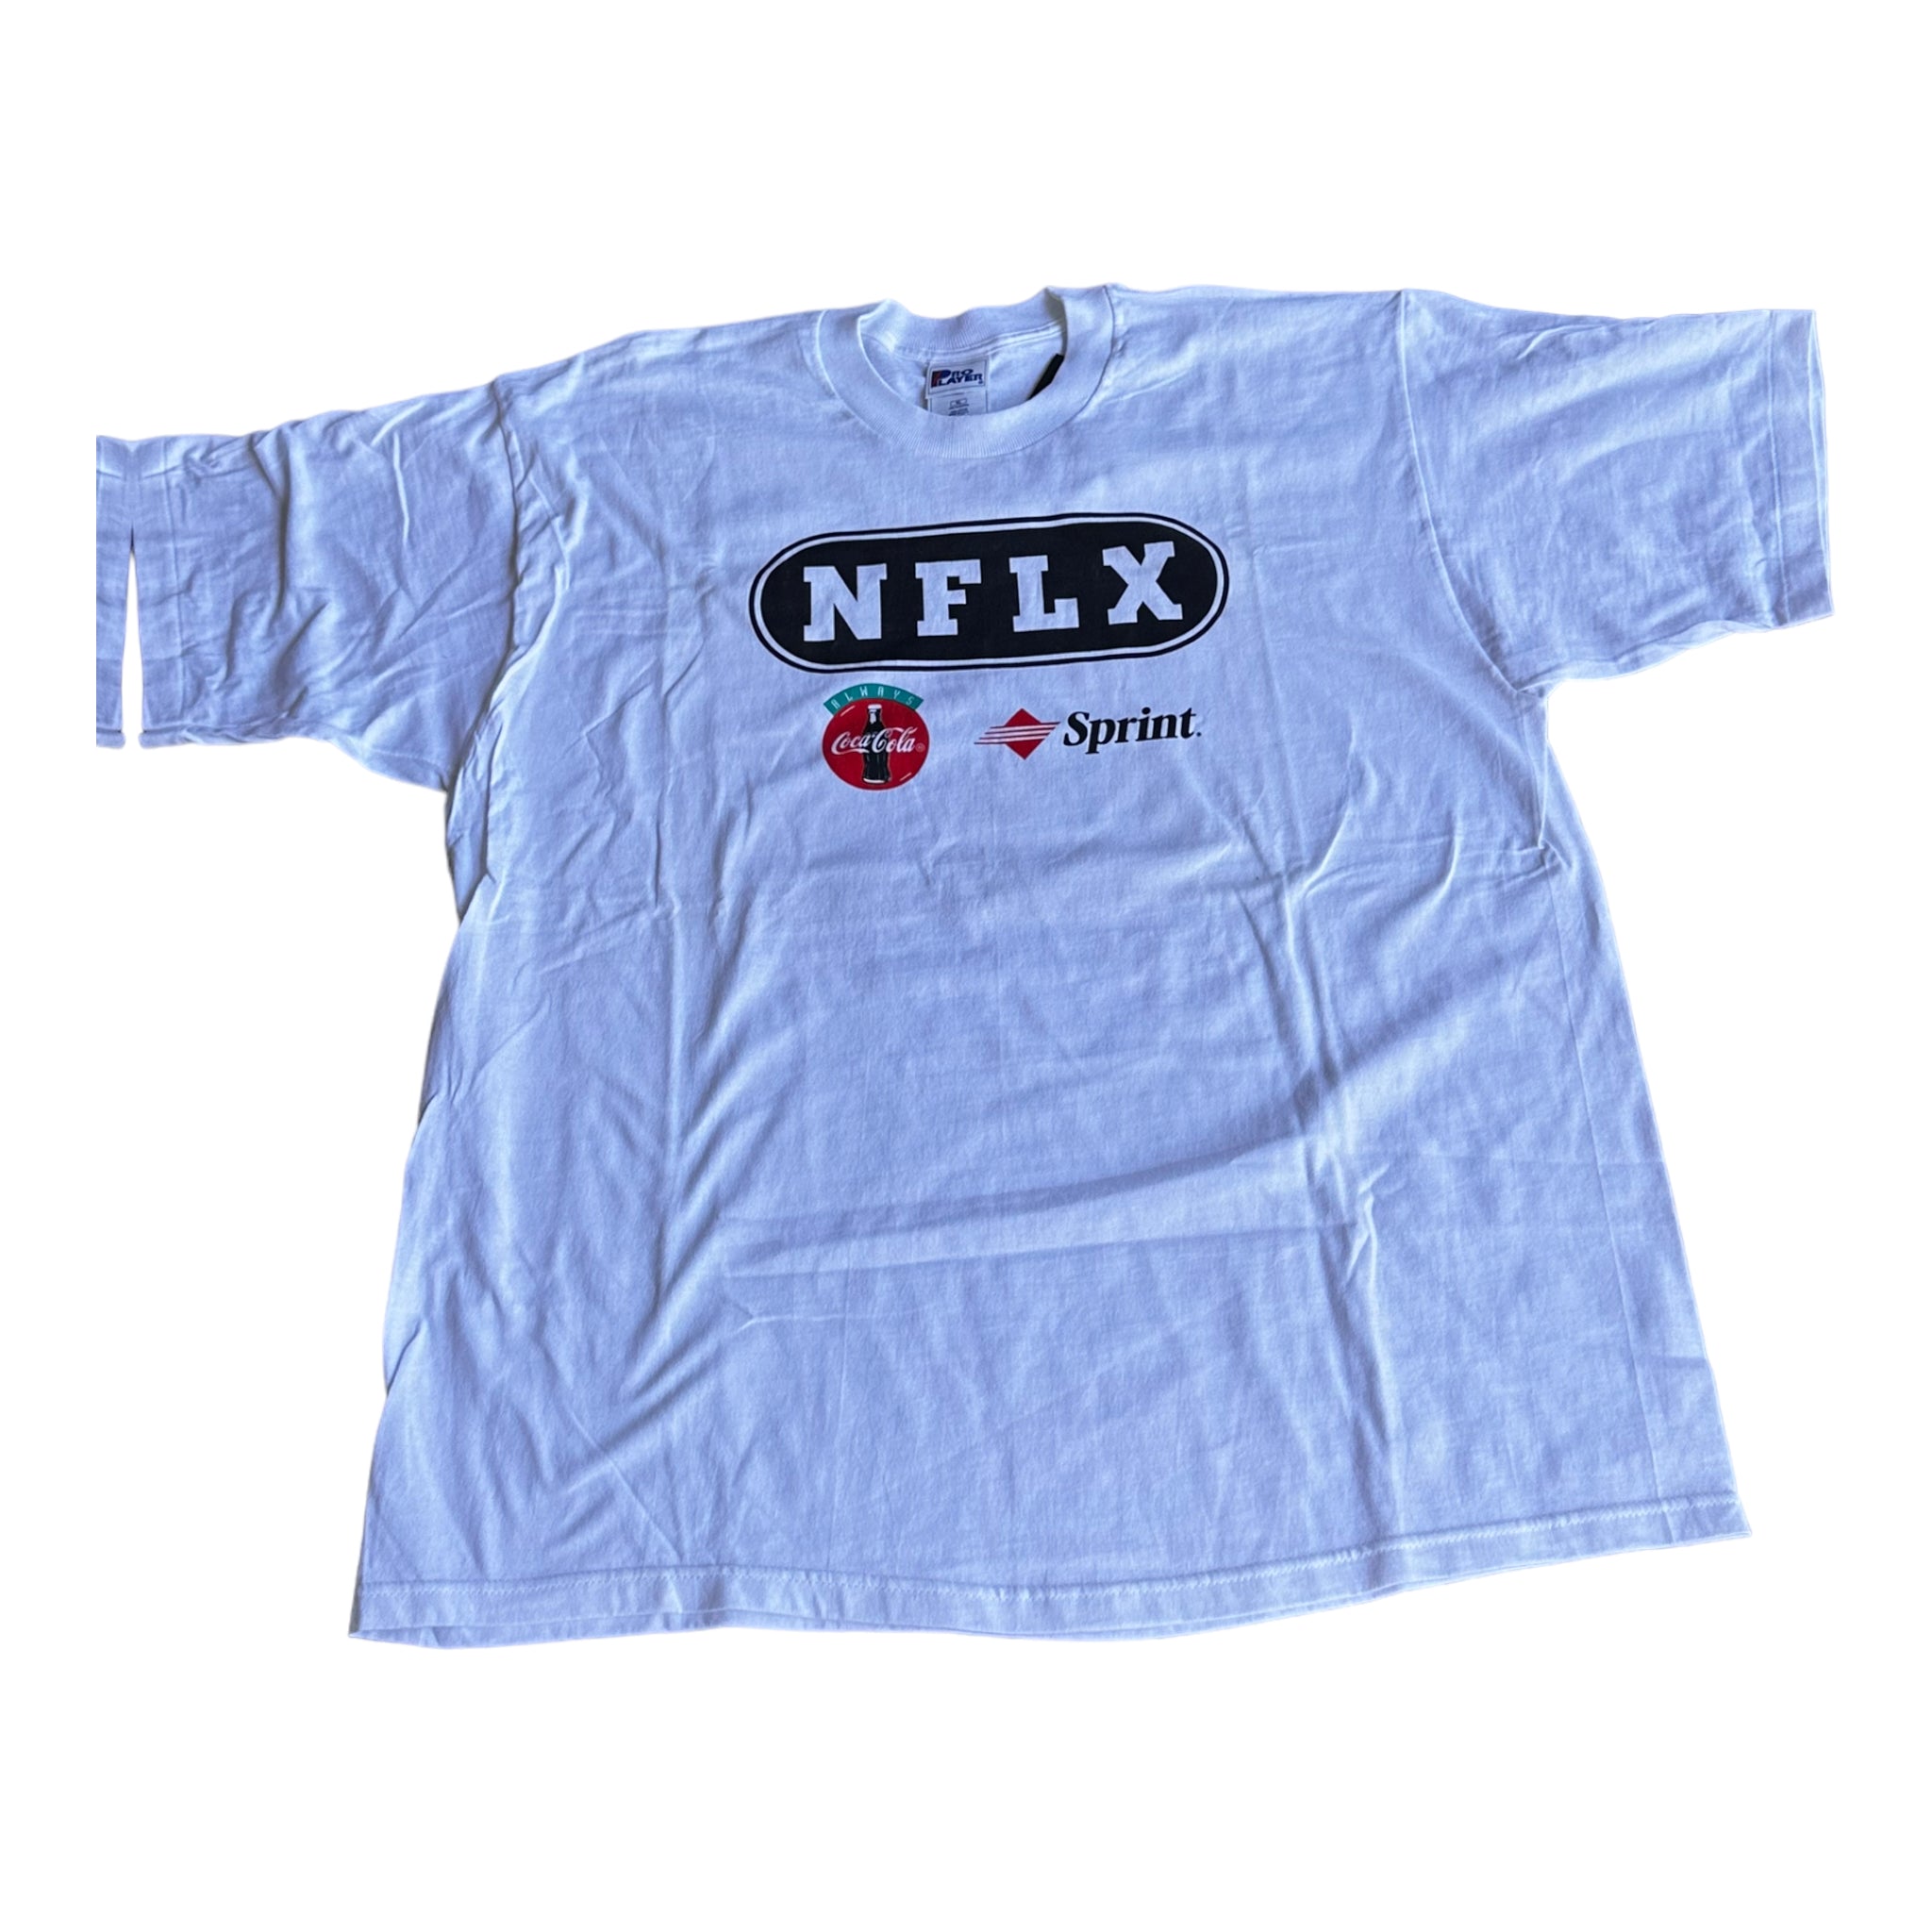 90's Pro Player NFL Experience Tee- C663